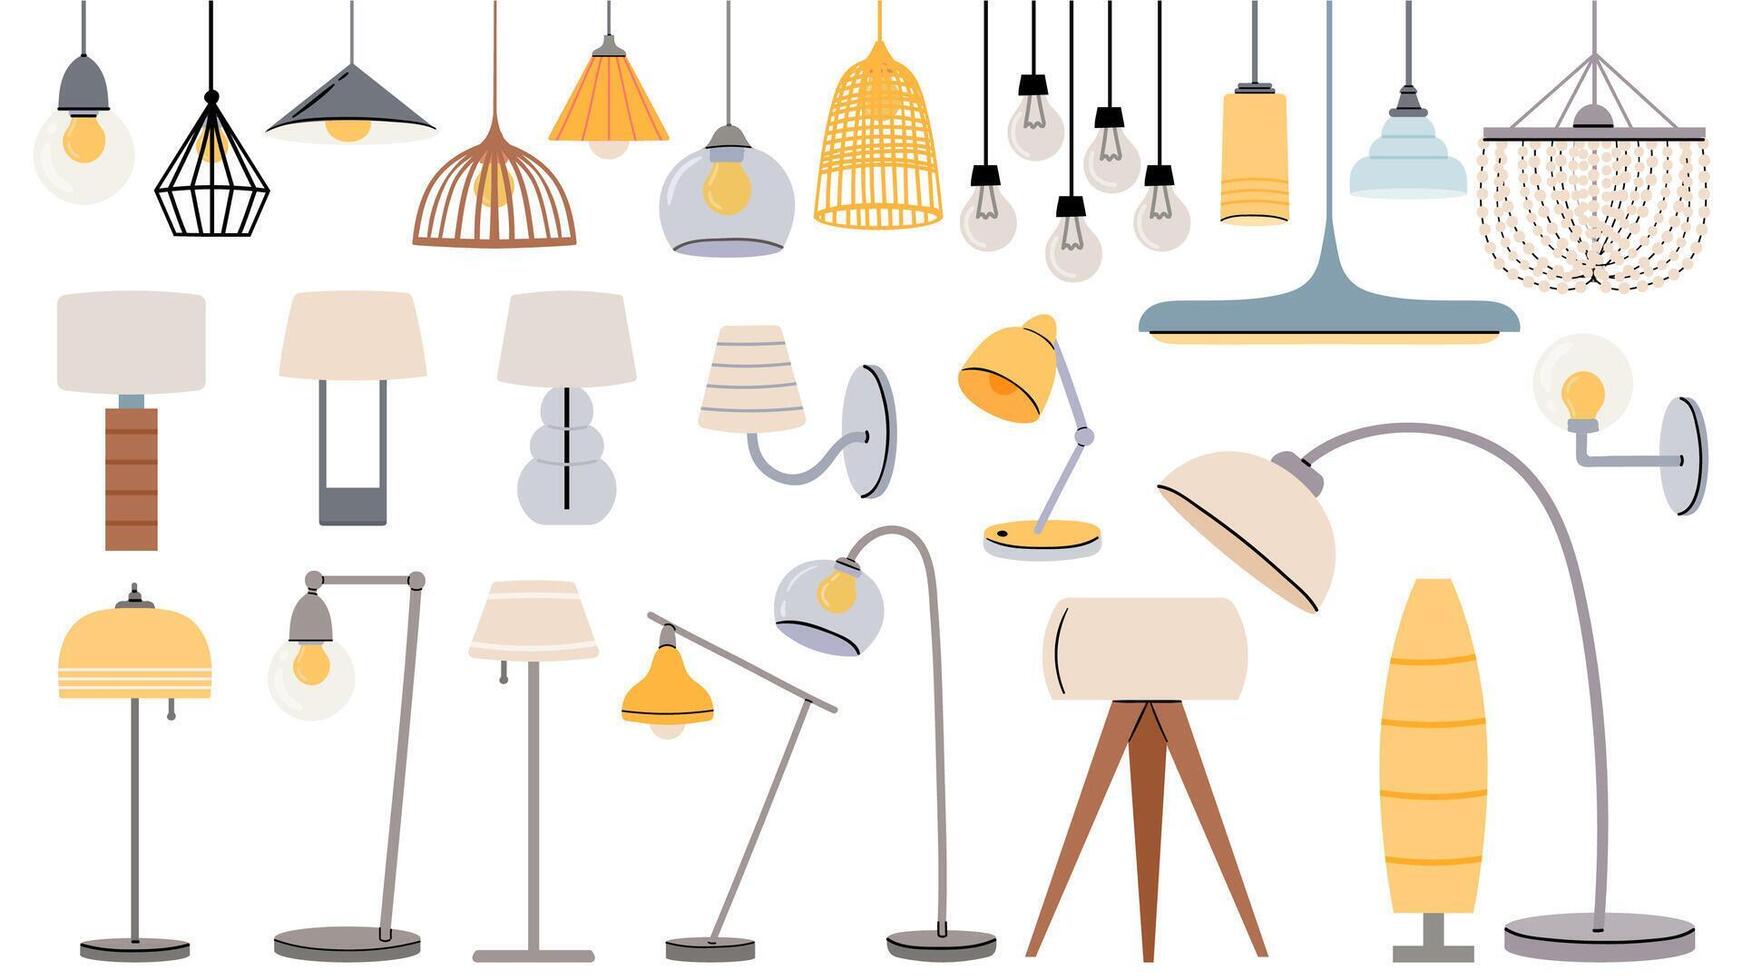 Cartoon lamps. Cozy flat torcheres, hanging chandeliers and lamp for table, floor. Home illumination design for modern interior vector set